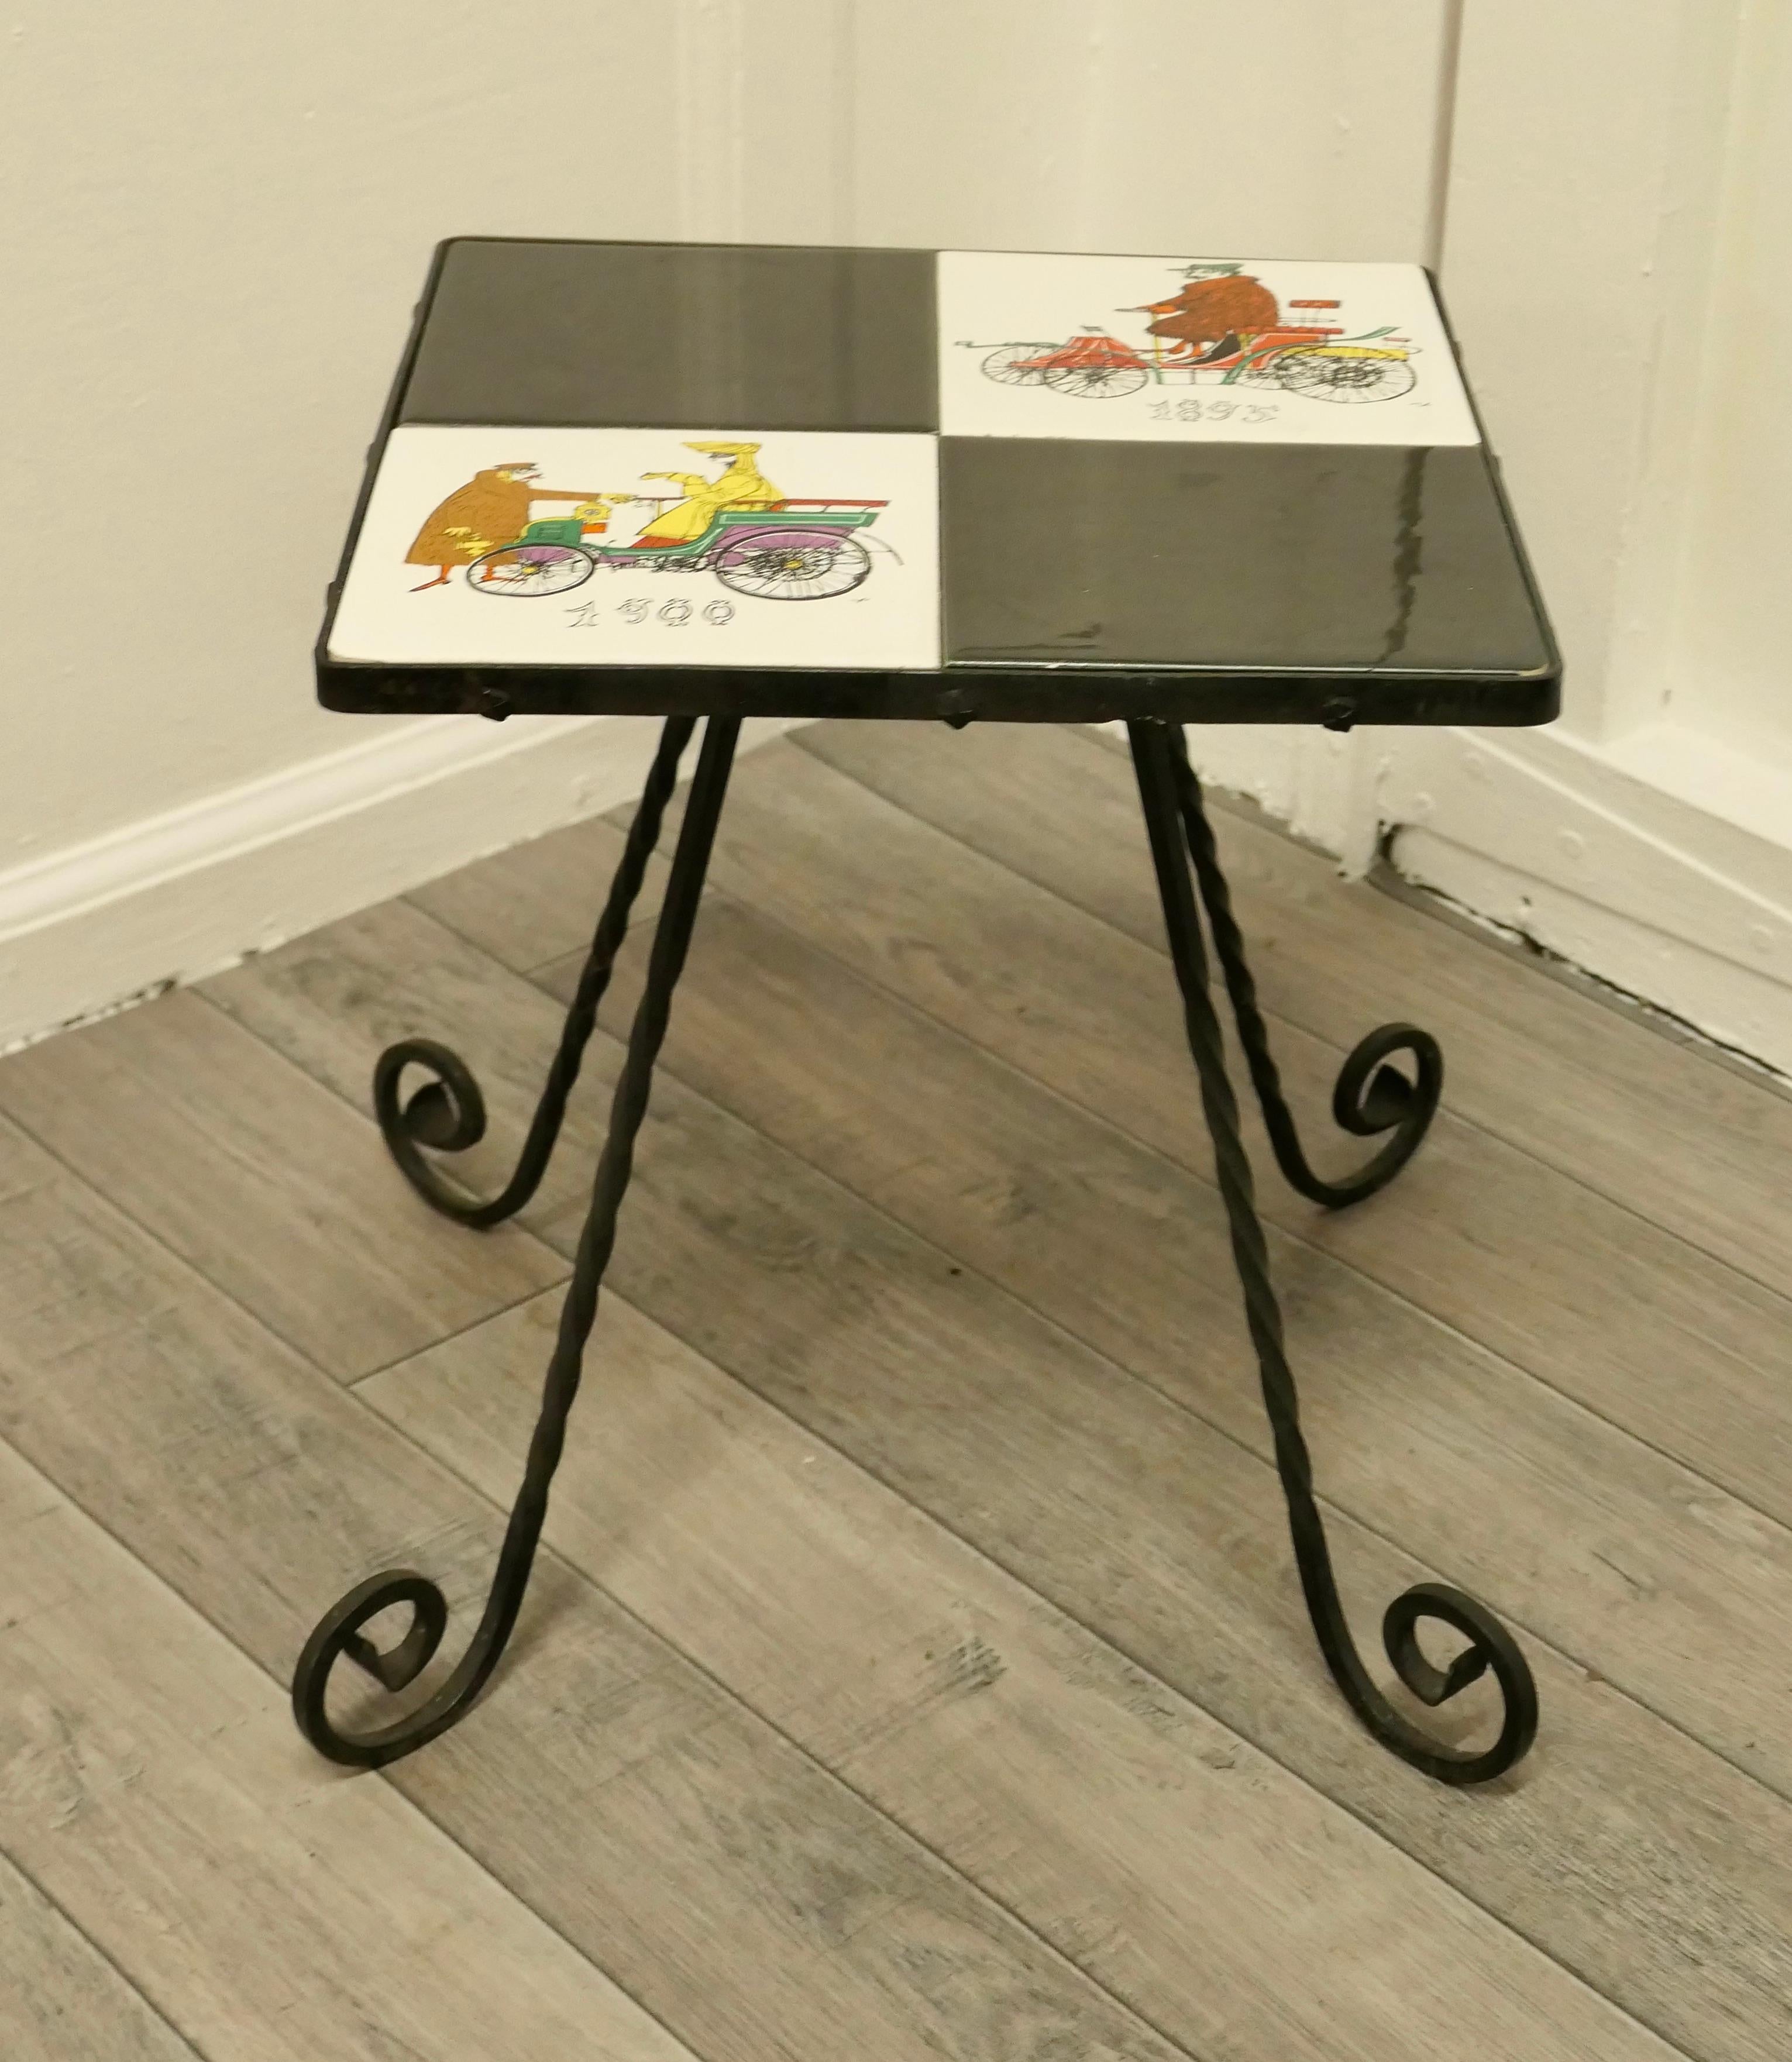 1960s Retro, “Wacky Races” Tiled Occasional Table  In Good Condition For Sale In Chillerton, Isle of Wight